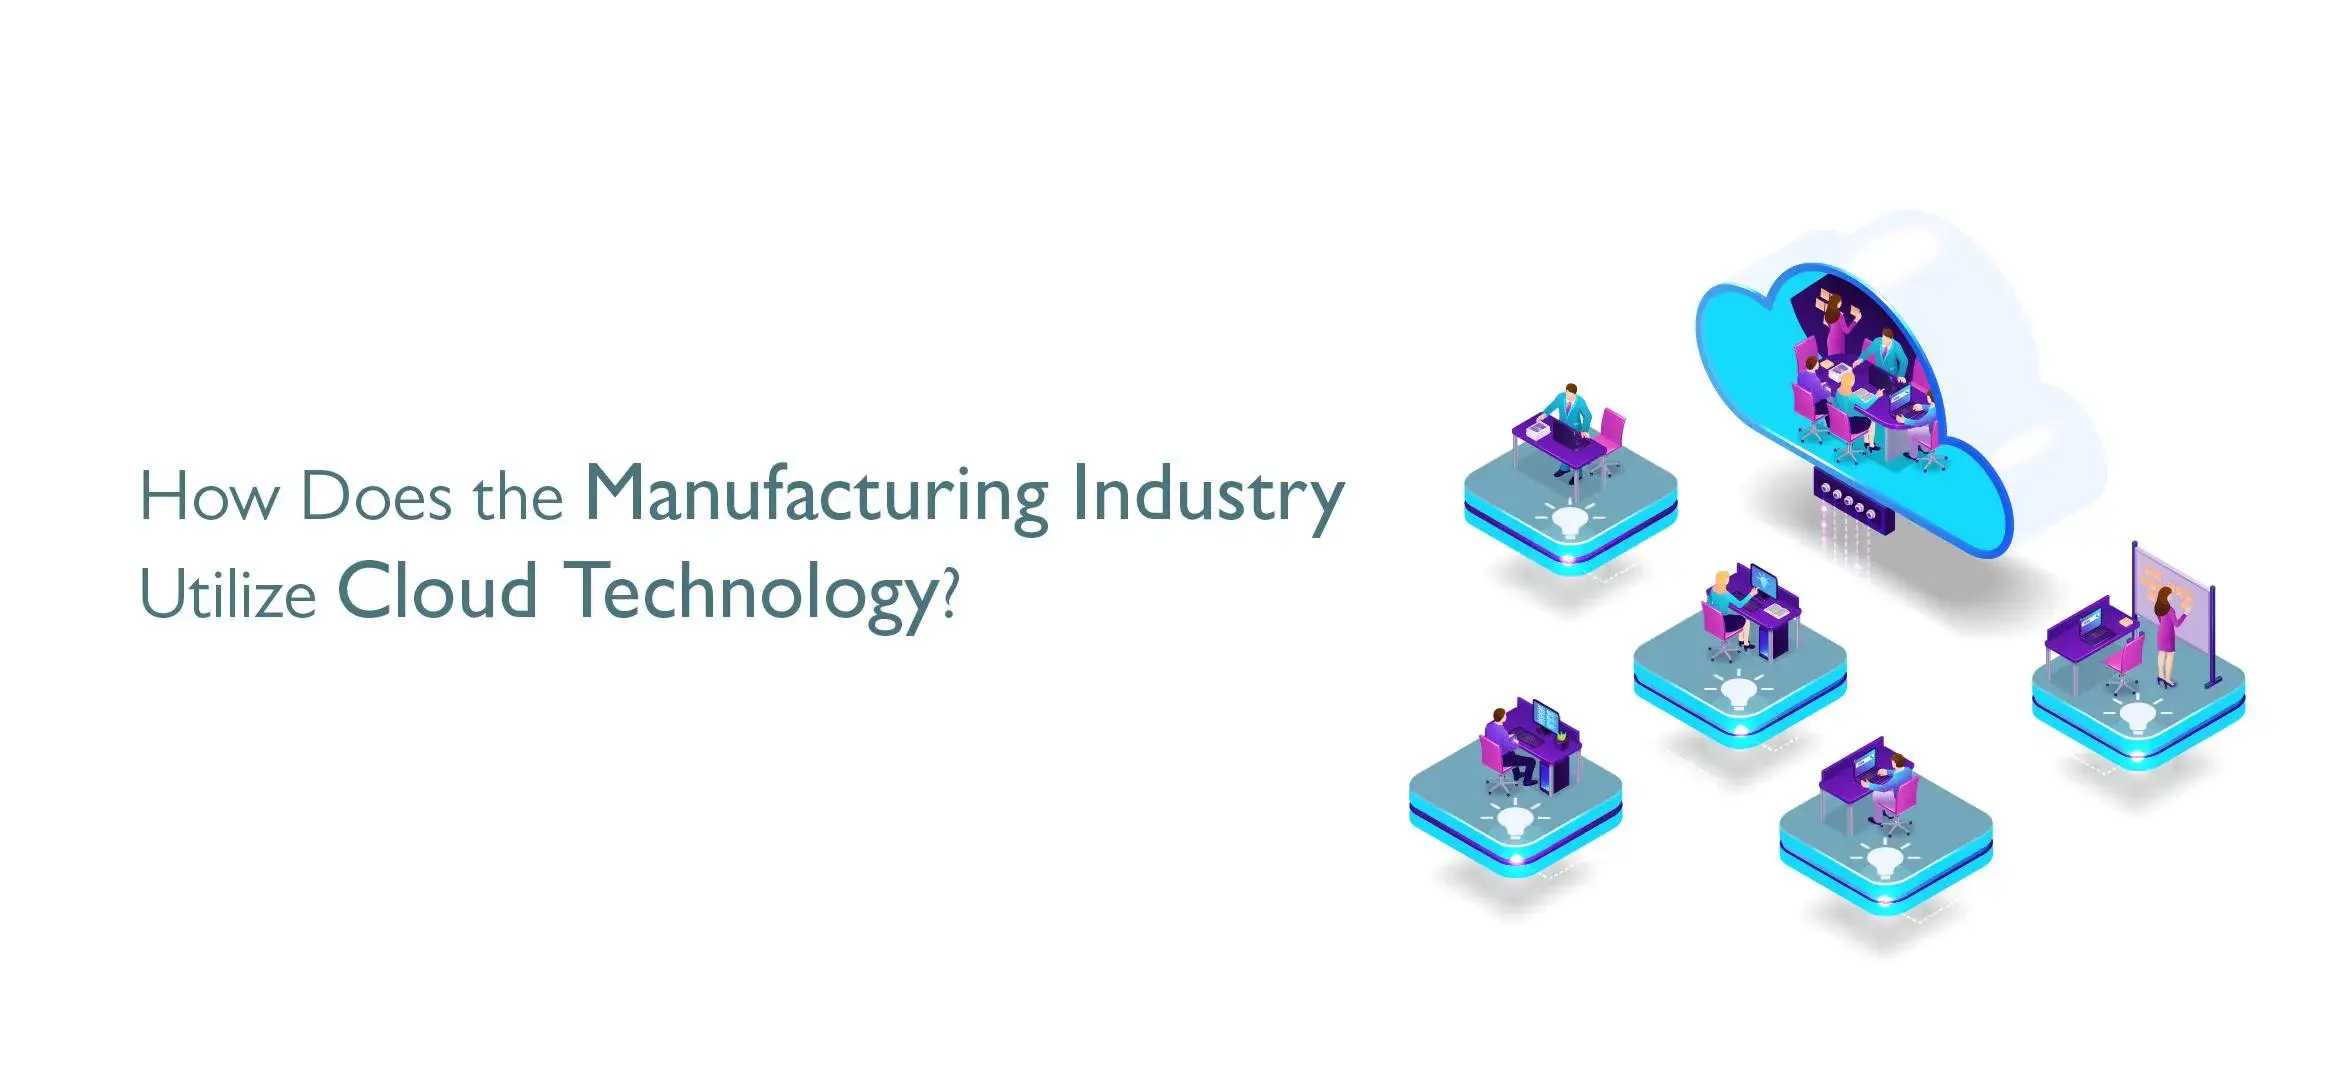 171223304116733765856-5-2022-blog-104-How-Does-the-Manufacturing-Industry-Utilize-Cloud-Technologyf-01.webp